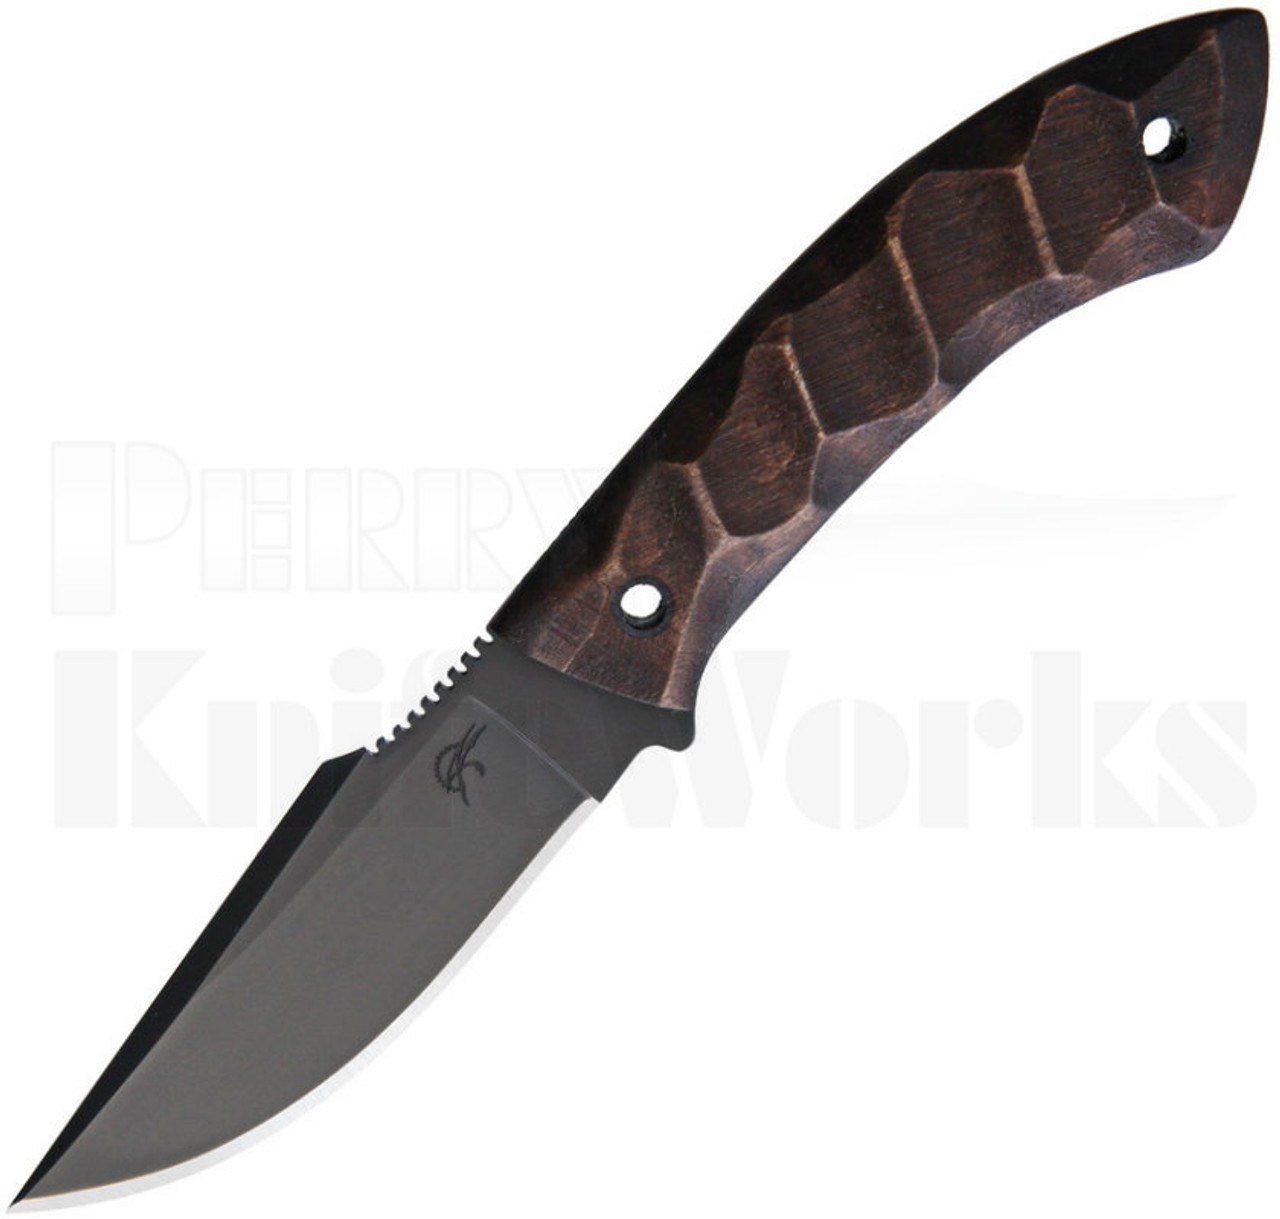 Daniel Winkler WKII Everycarry Fixed Blade Knife Sculpted Maple